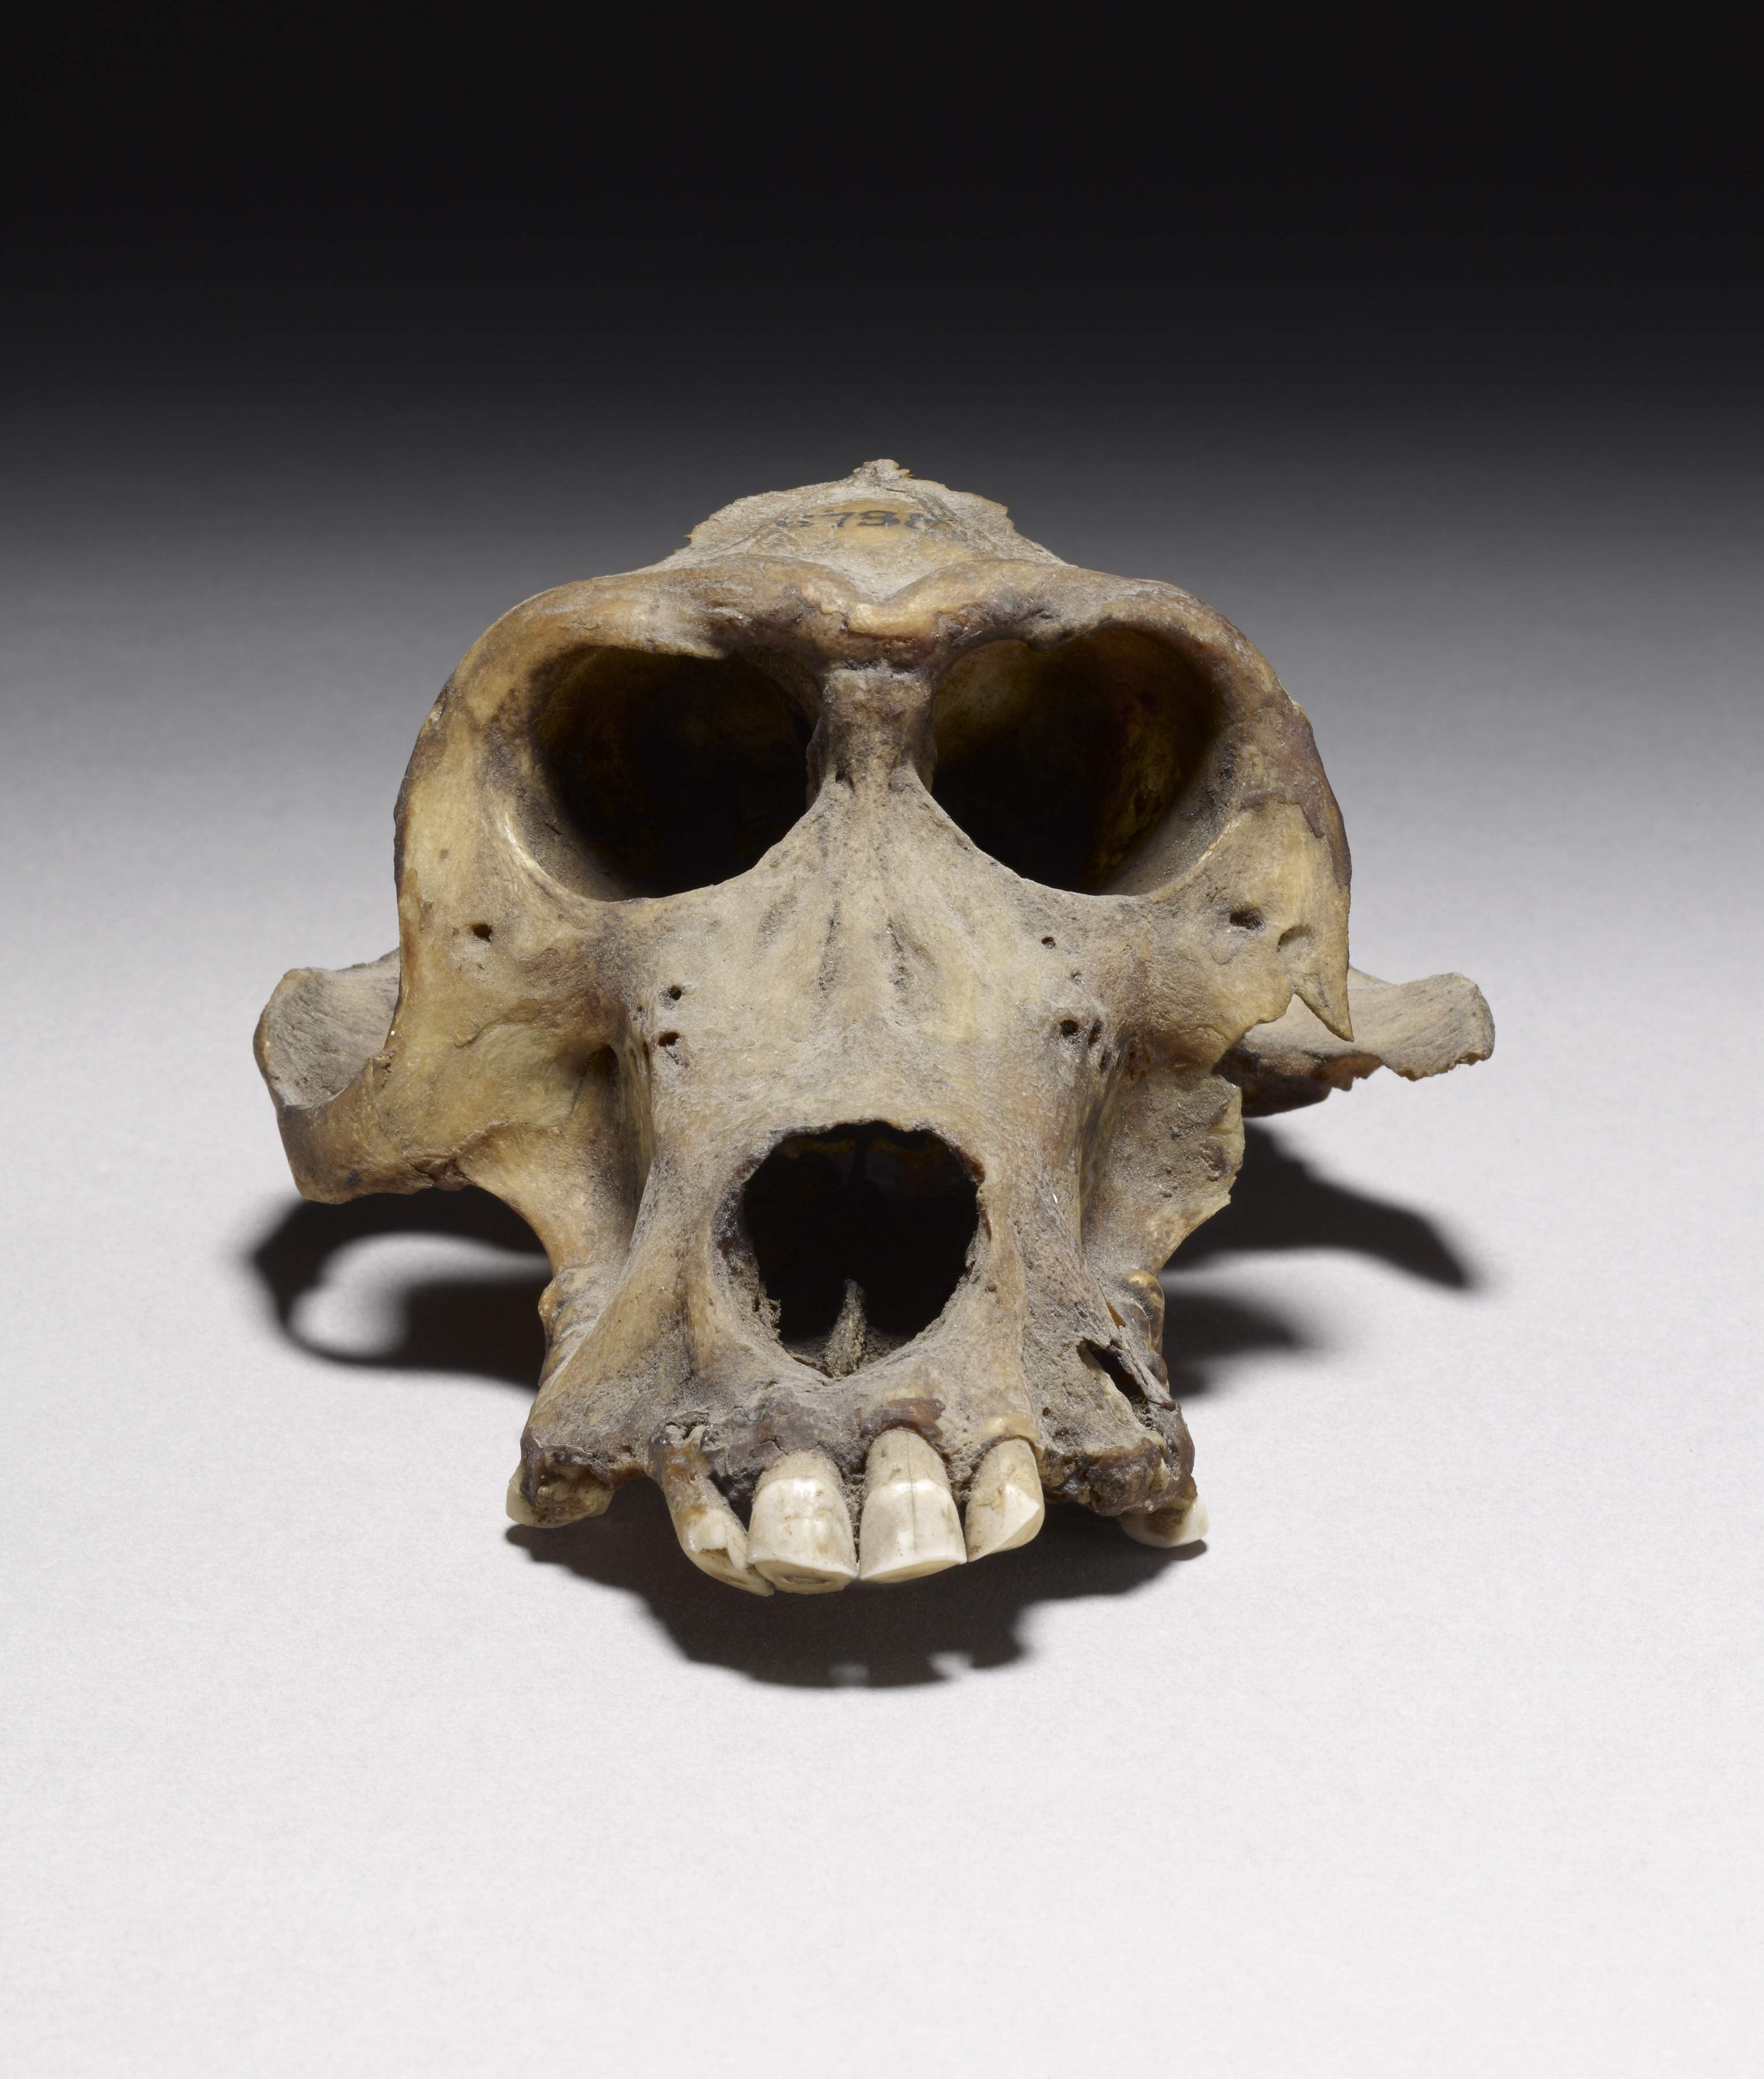 Skull of a mummified baboon recovered from Thebes, Egypt and connected isotopically to Eritrea/Ethiopia/Somalia.